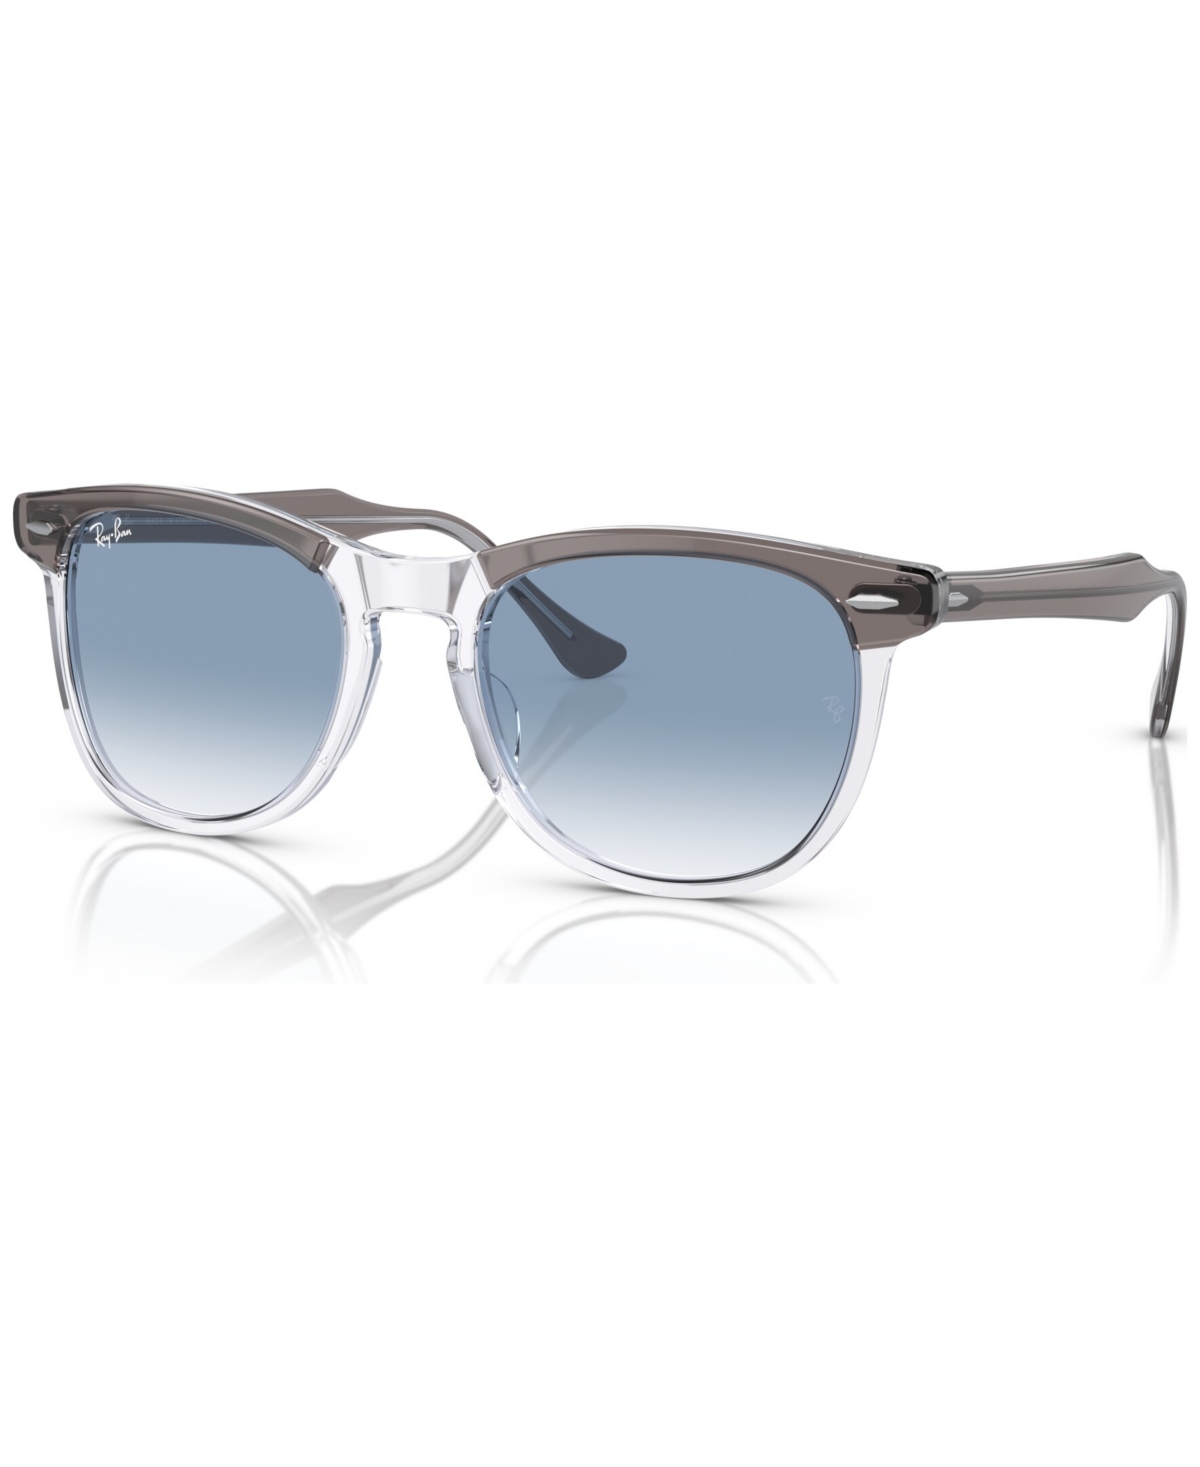 Ray Ban Ray-ban Unisex Sunglasses, Eagle Eye In Gray On Transparent